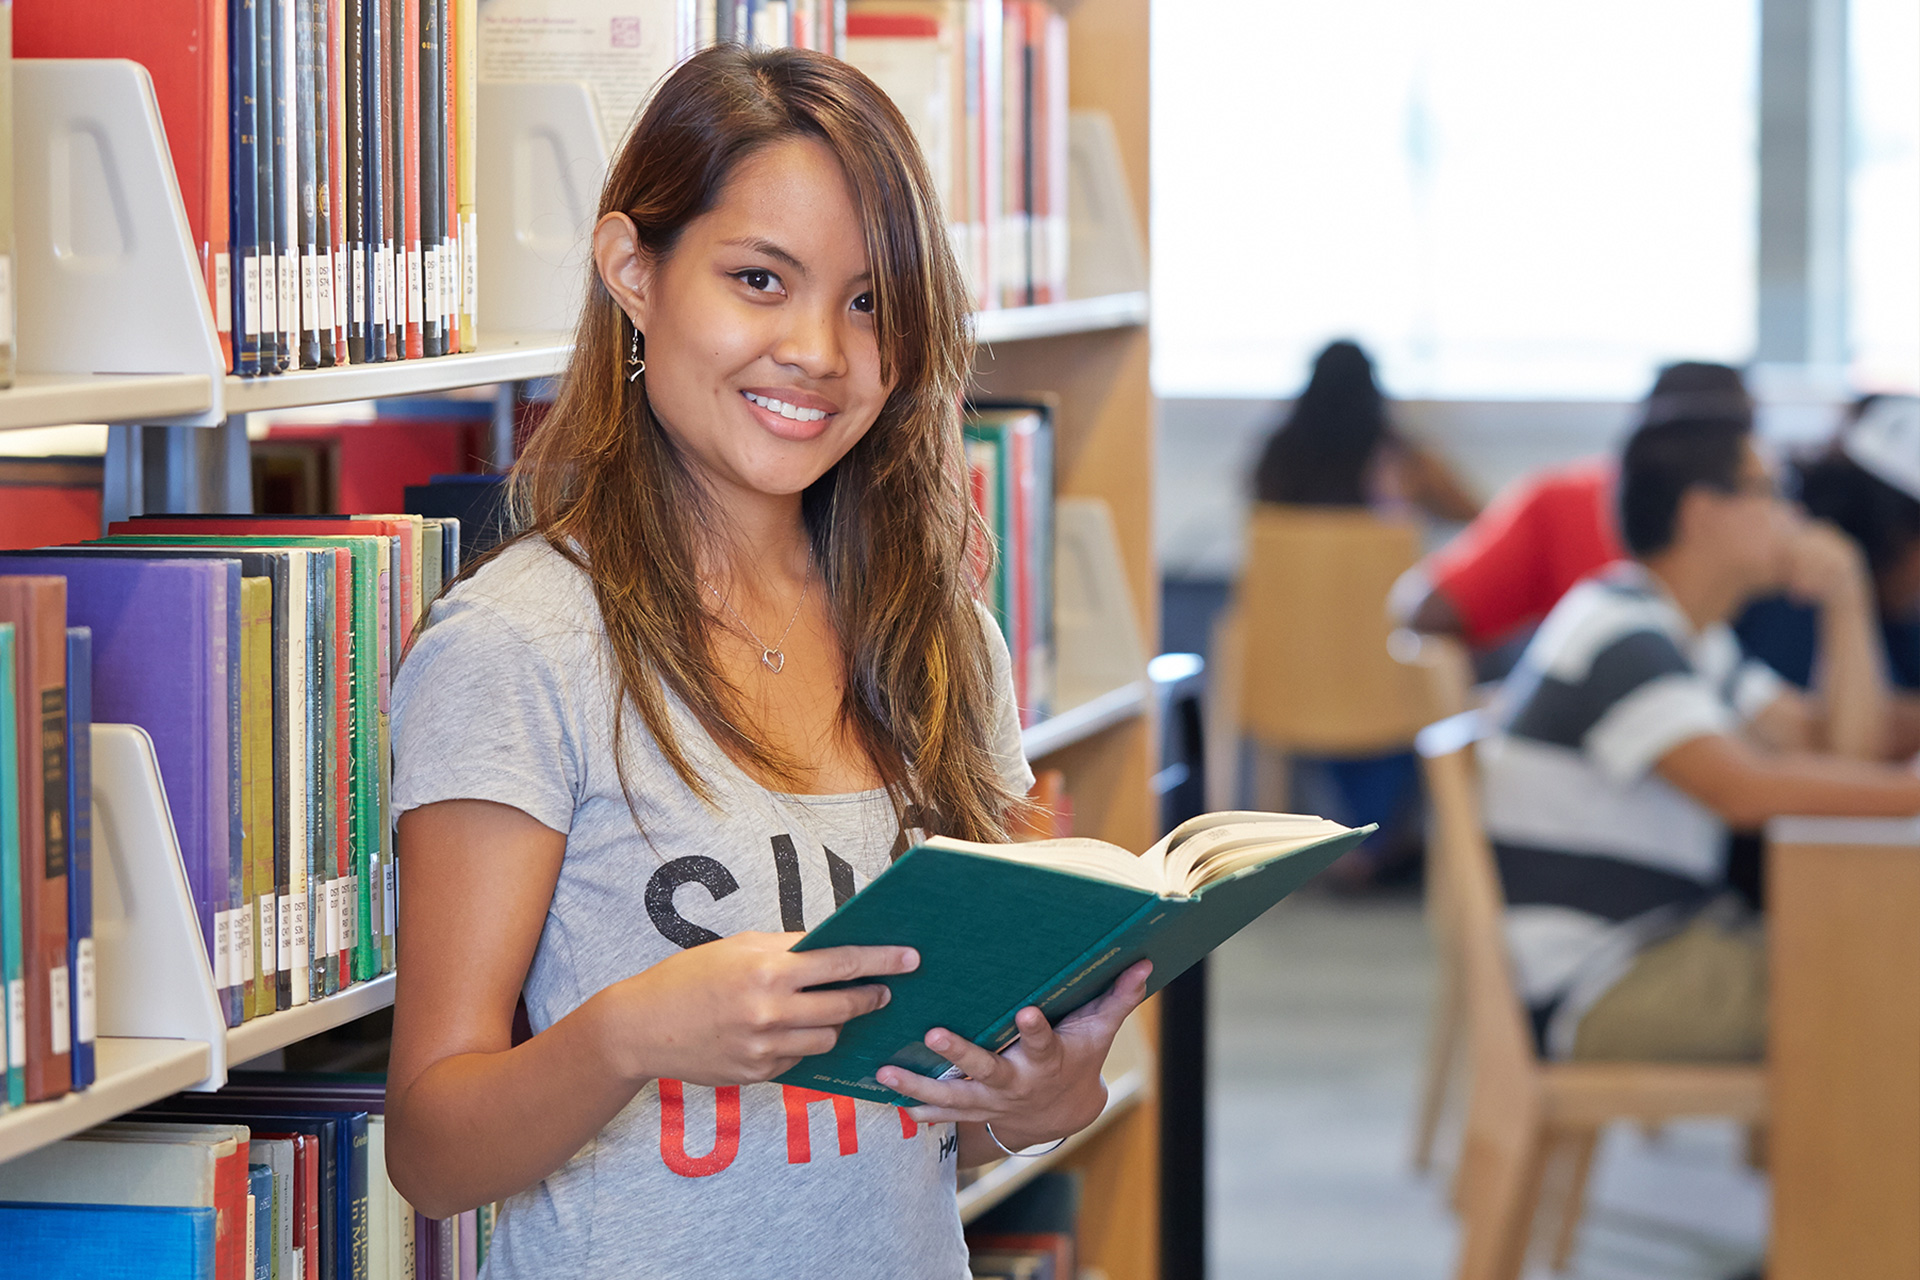 A student holding an open book in the library stacks.